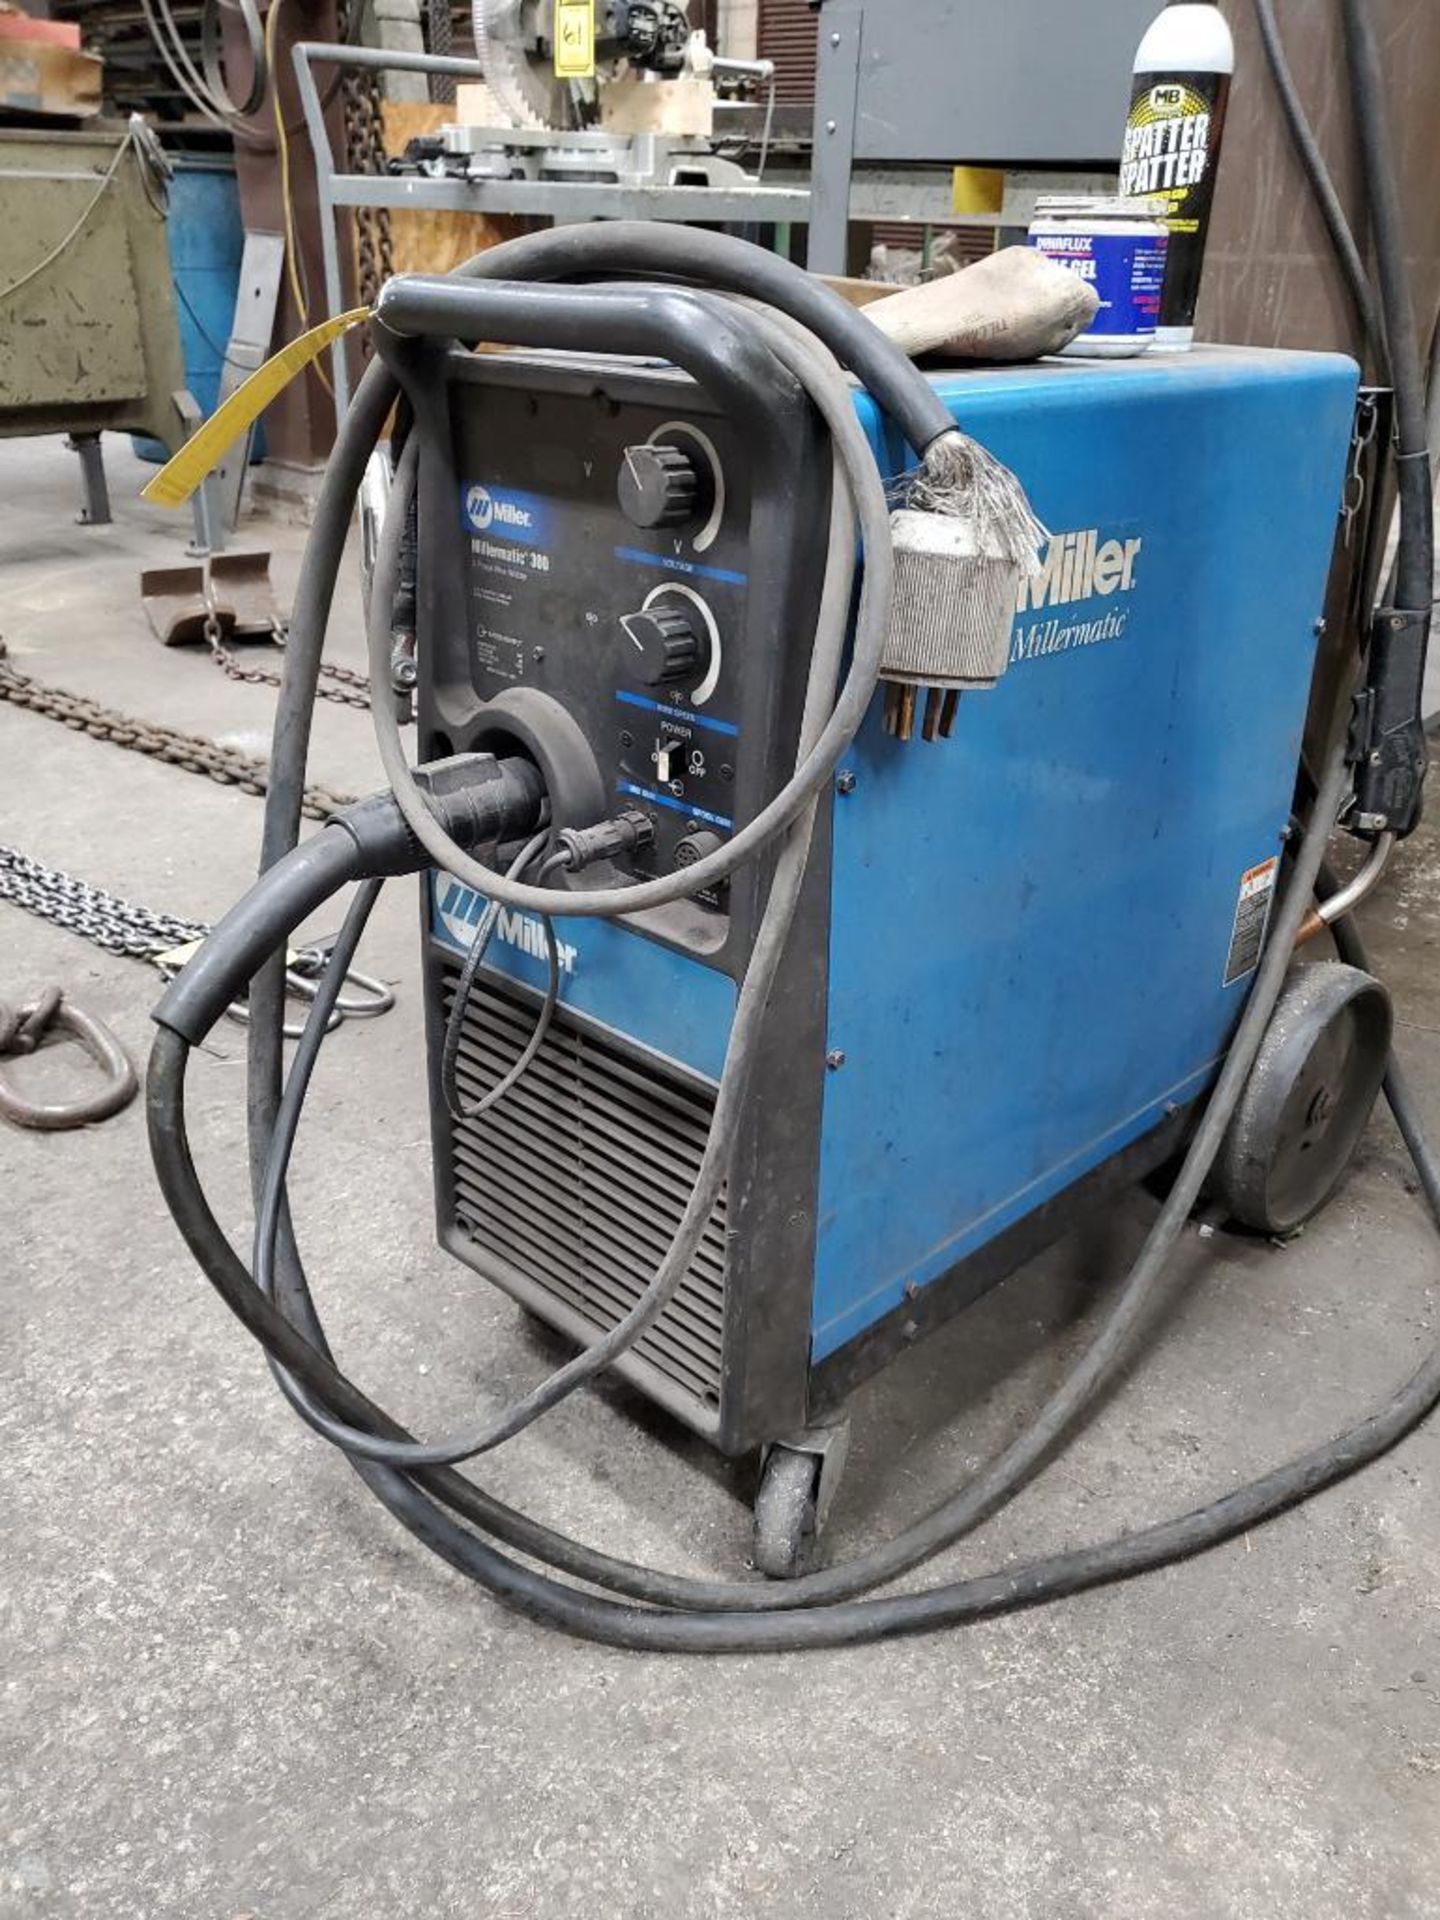 Miller Millermatic 300 3-Phase Wire Welder - Image 4 of 5